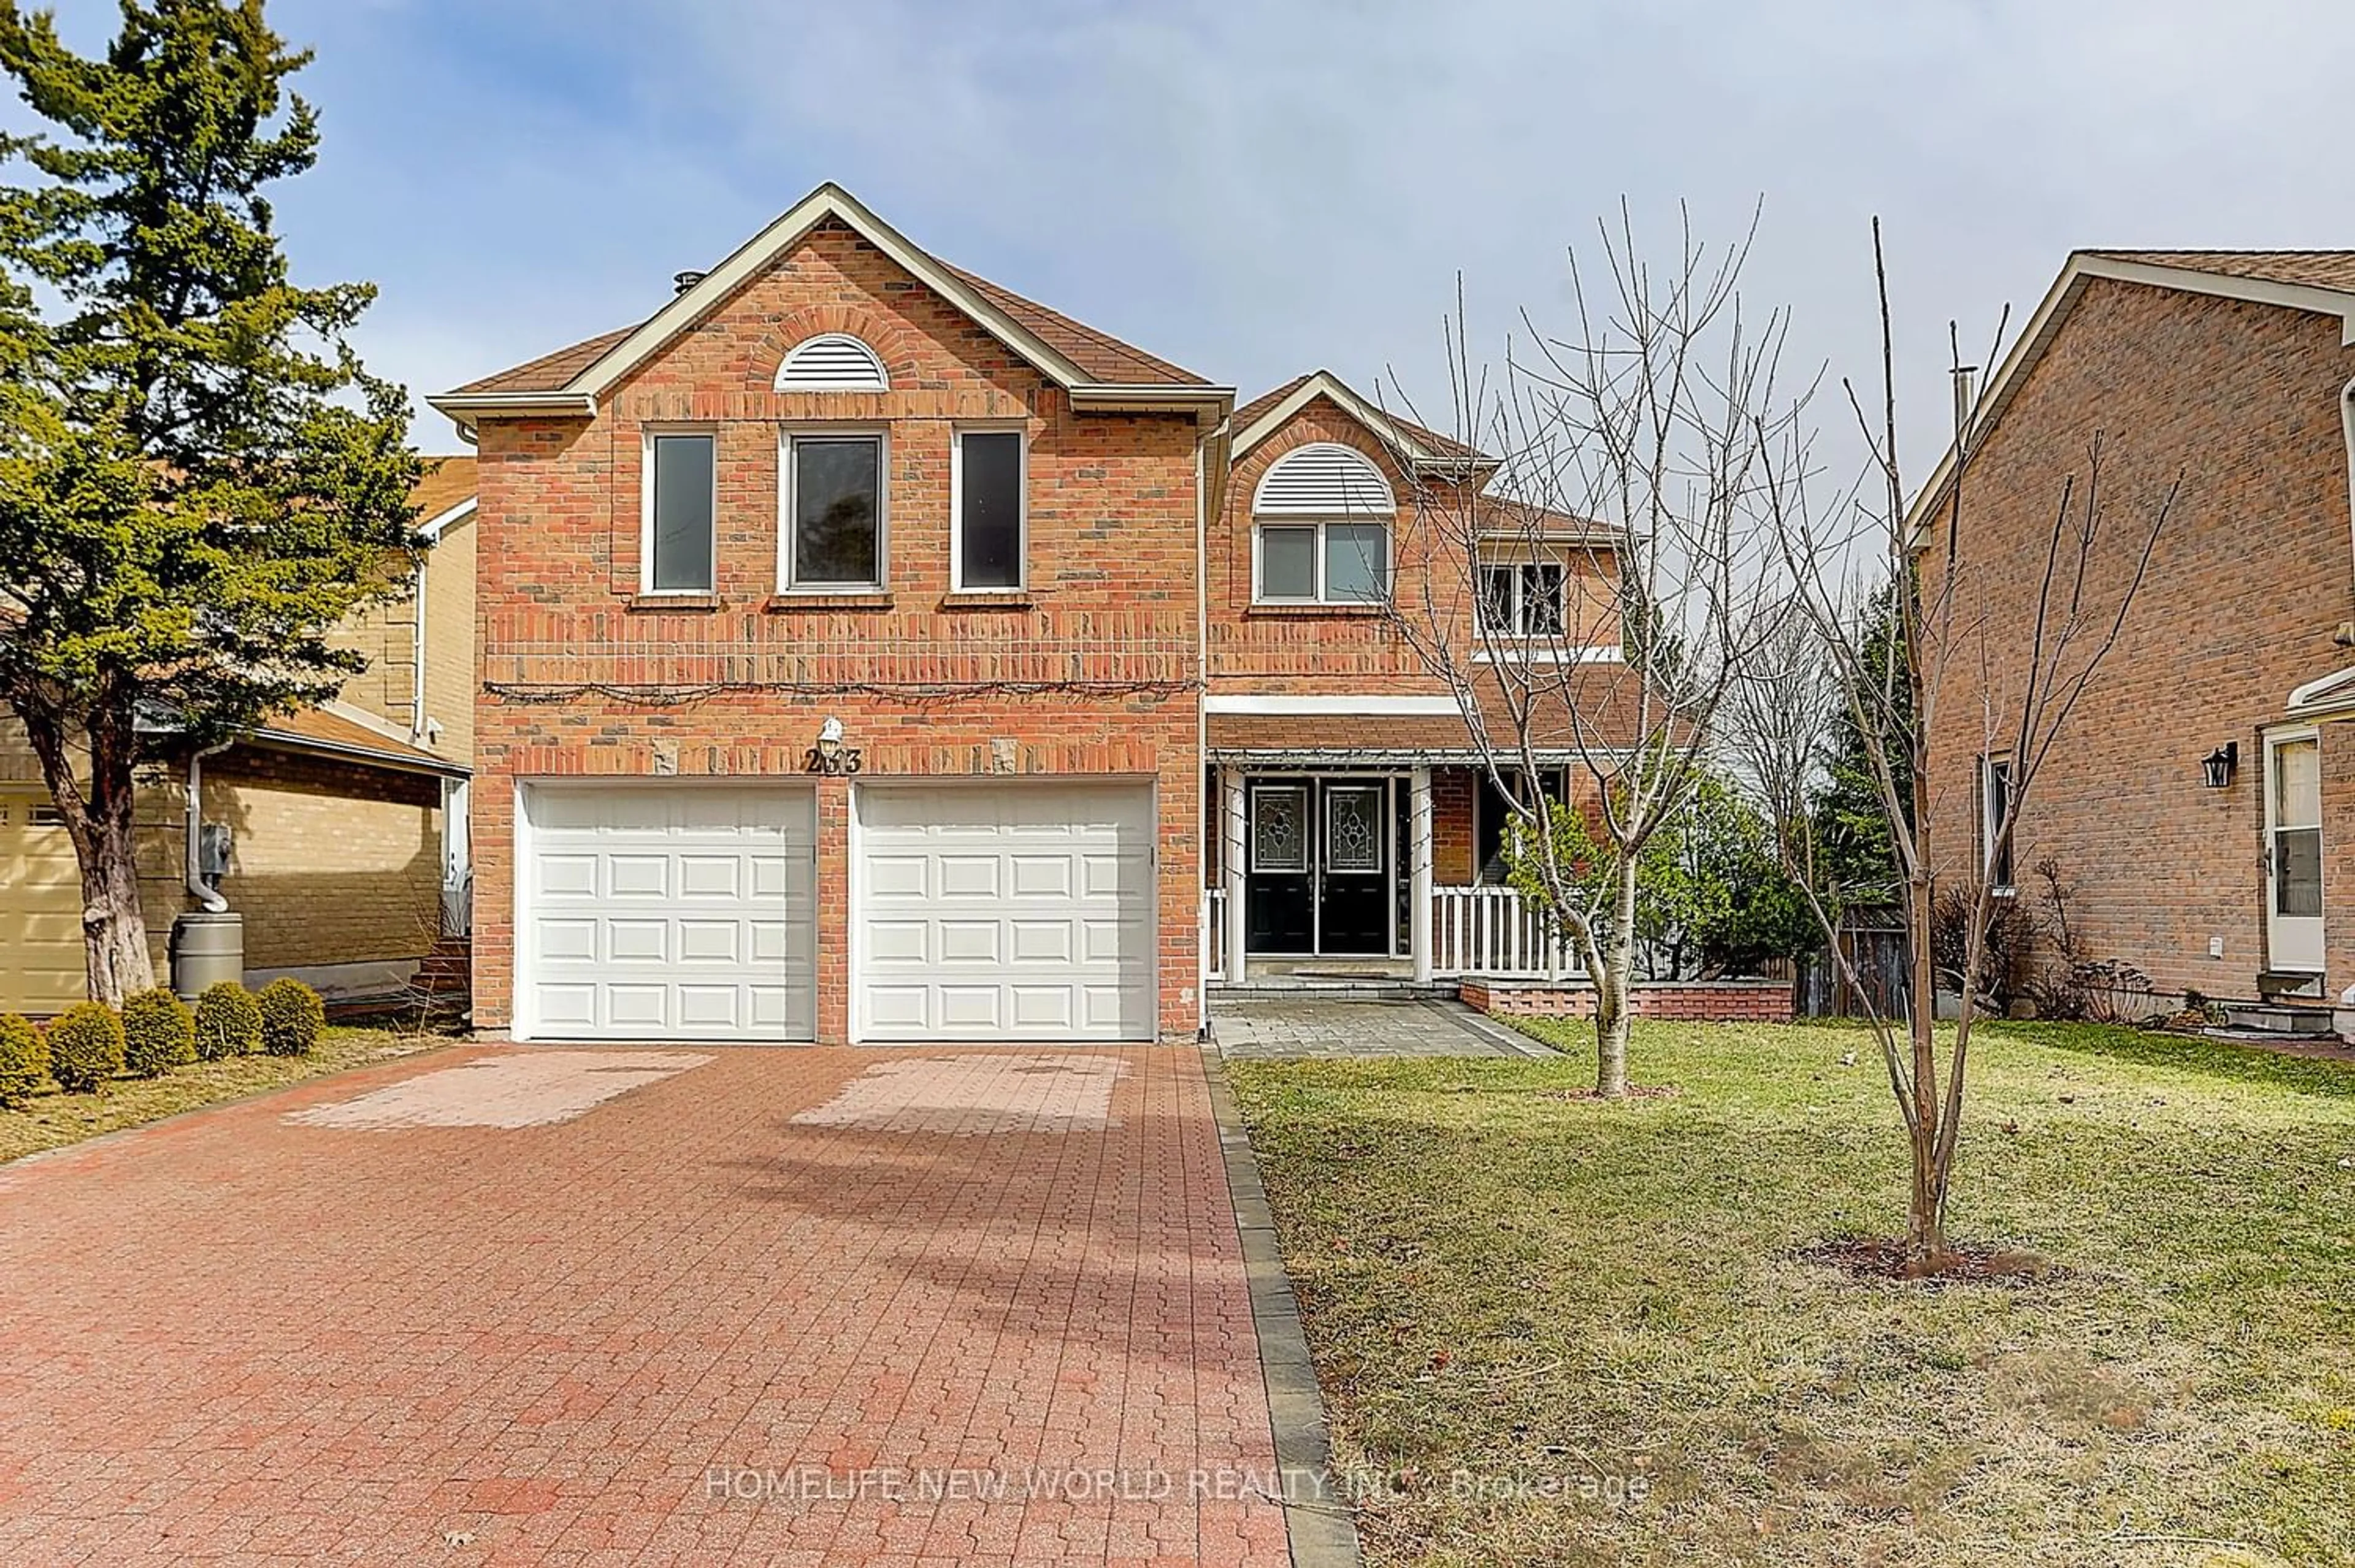 Home with brick exterior material for 233 Brimson Dr, Newmarket Ontario L3X 1H8